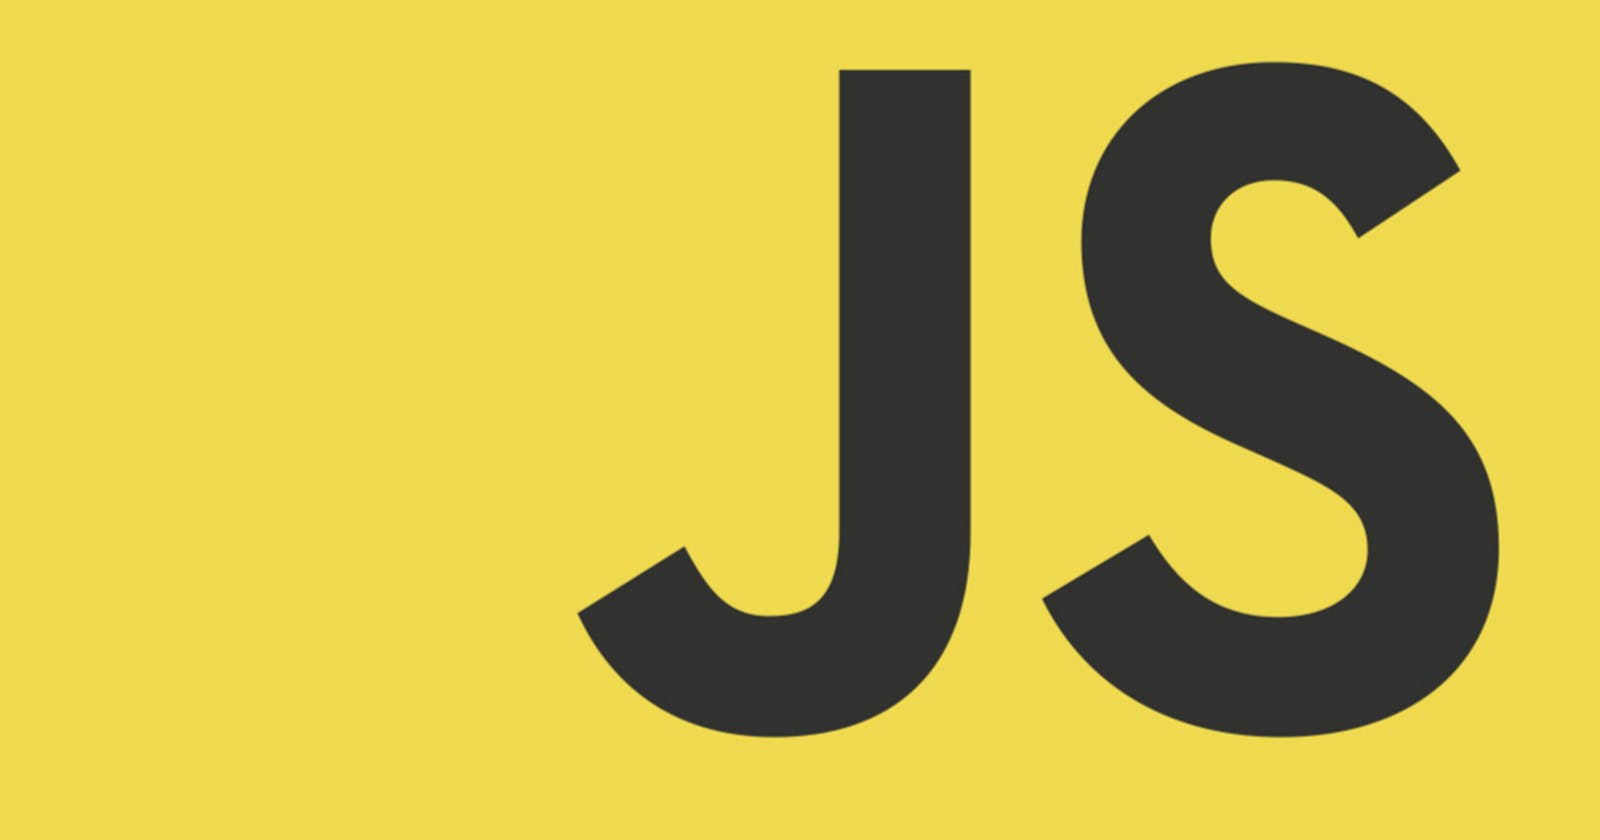 Five projects with JavaScript